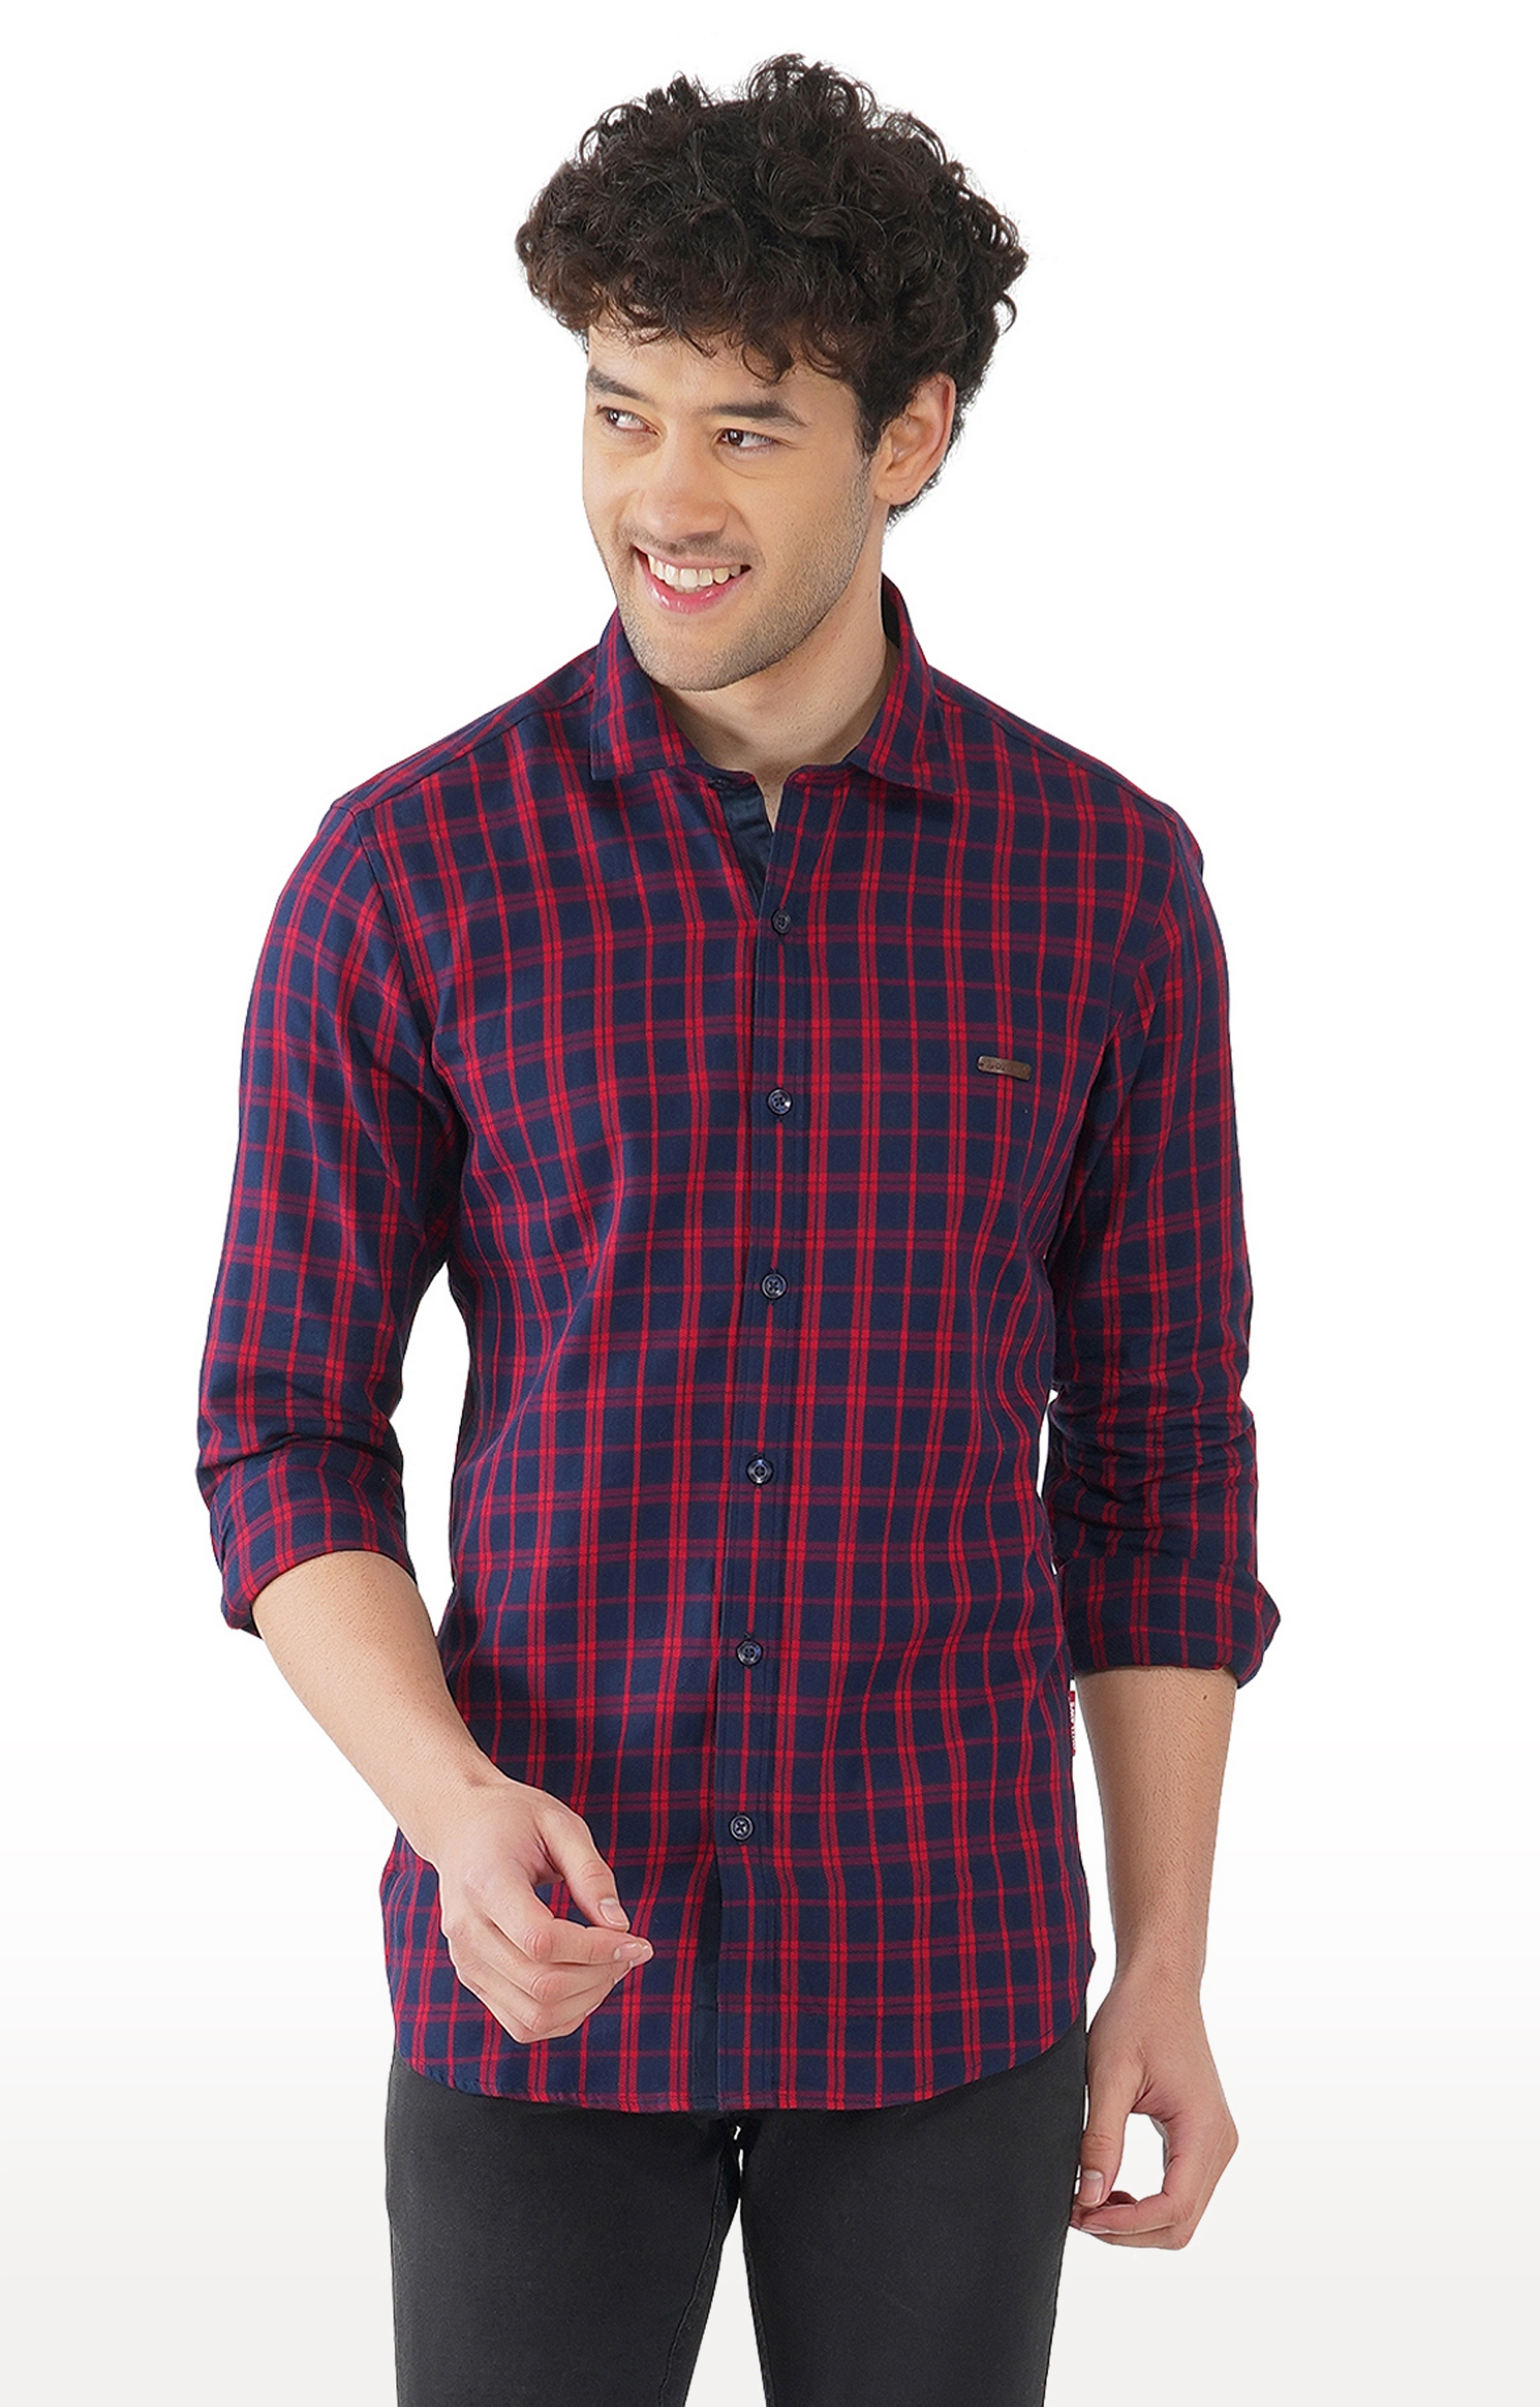 OUTLAWS | Outlaws 7041 - 100% Cotton Multi Color Check Smart Fit Shirt 0